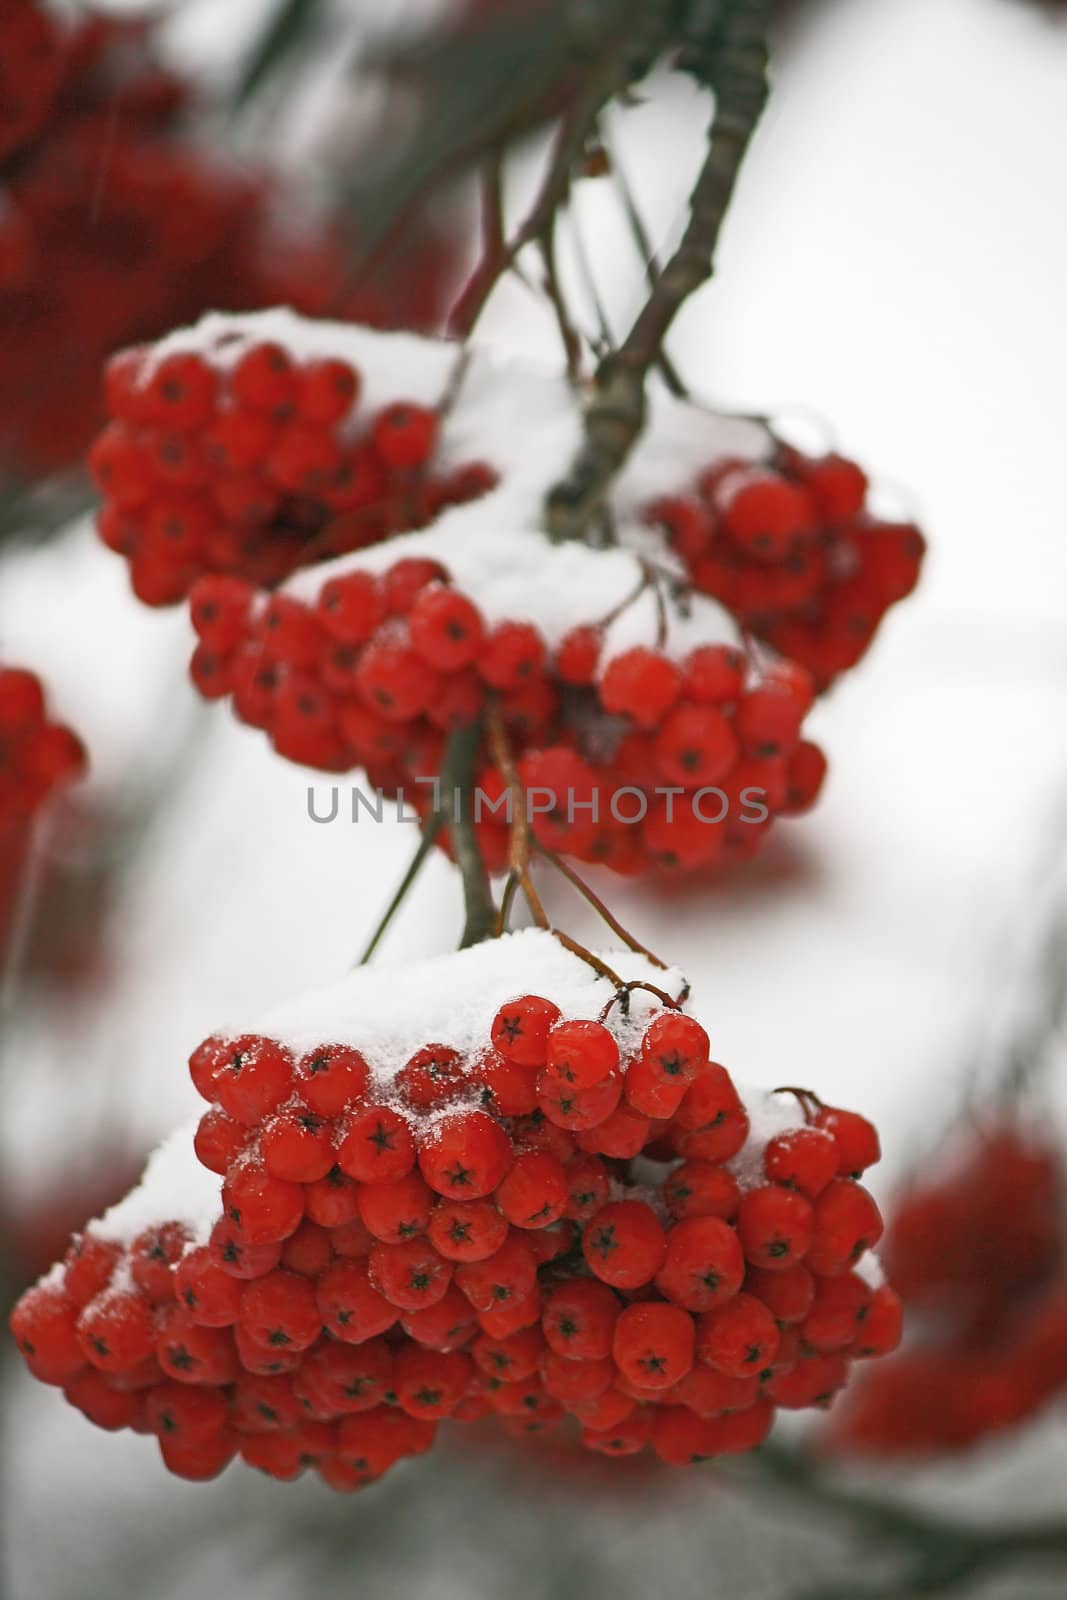 There has come winter. Snow has dropped out. On red berries white snow lies.